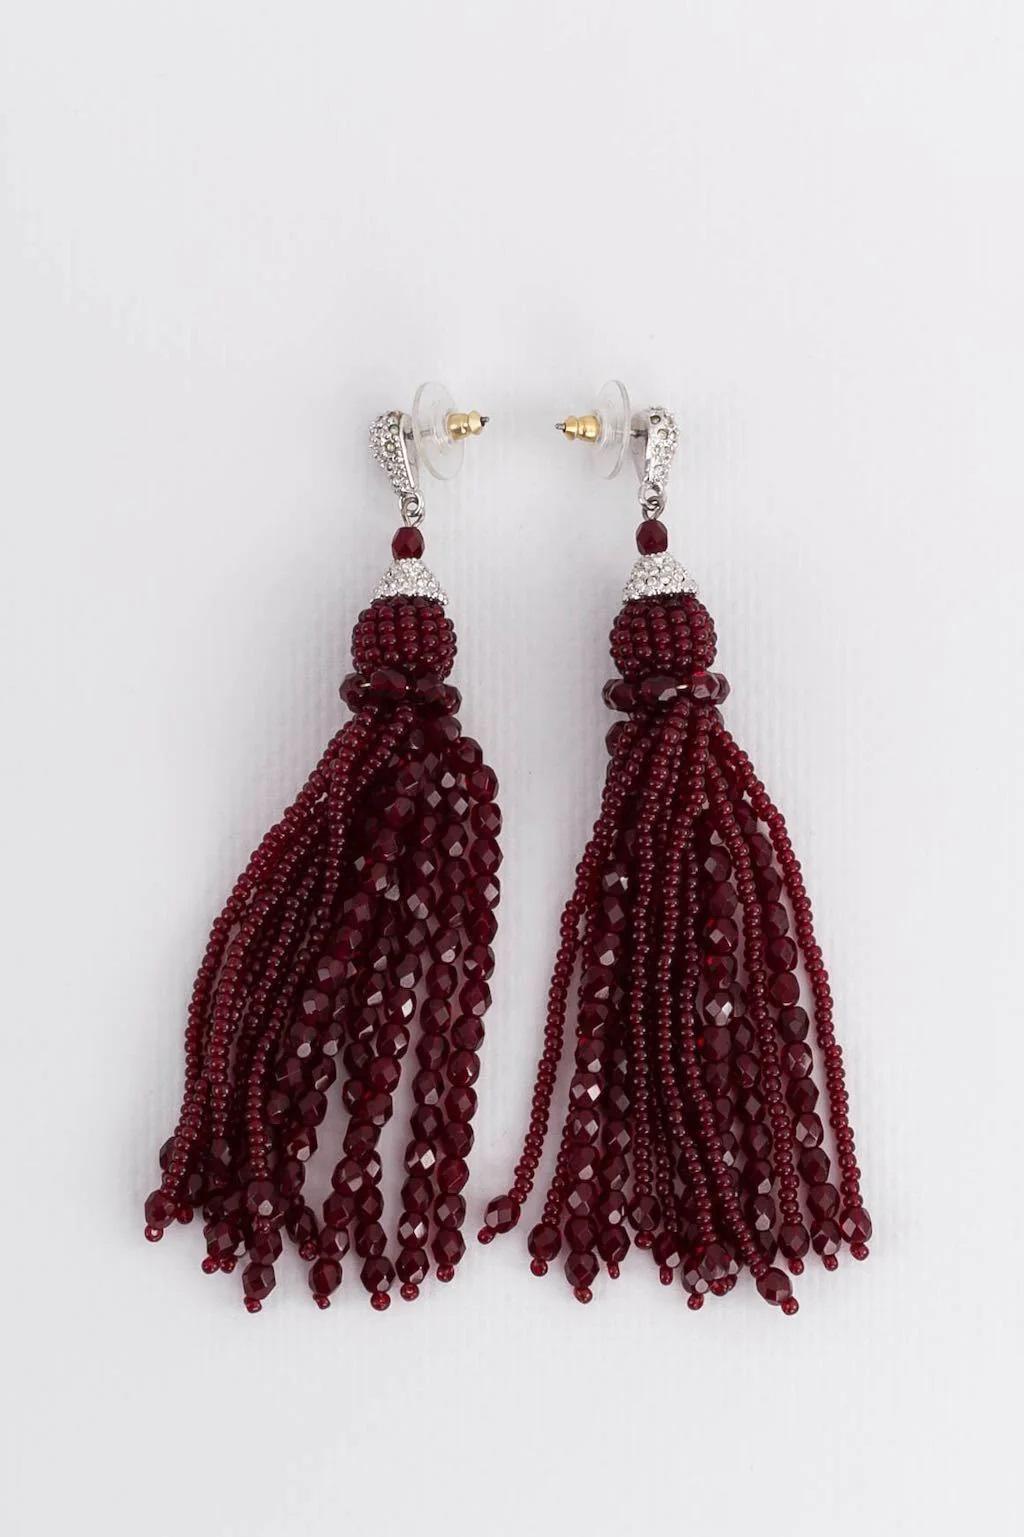 Christian Dior (Attributed to) Silver metal earrings set with rhinestones and beaded tassels. Not signed.

Additional information:
Dimensions: 10 L (3.94